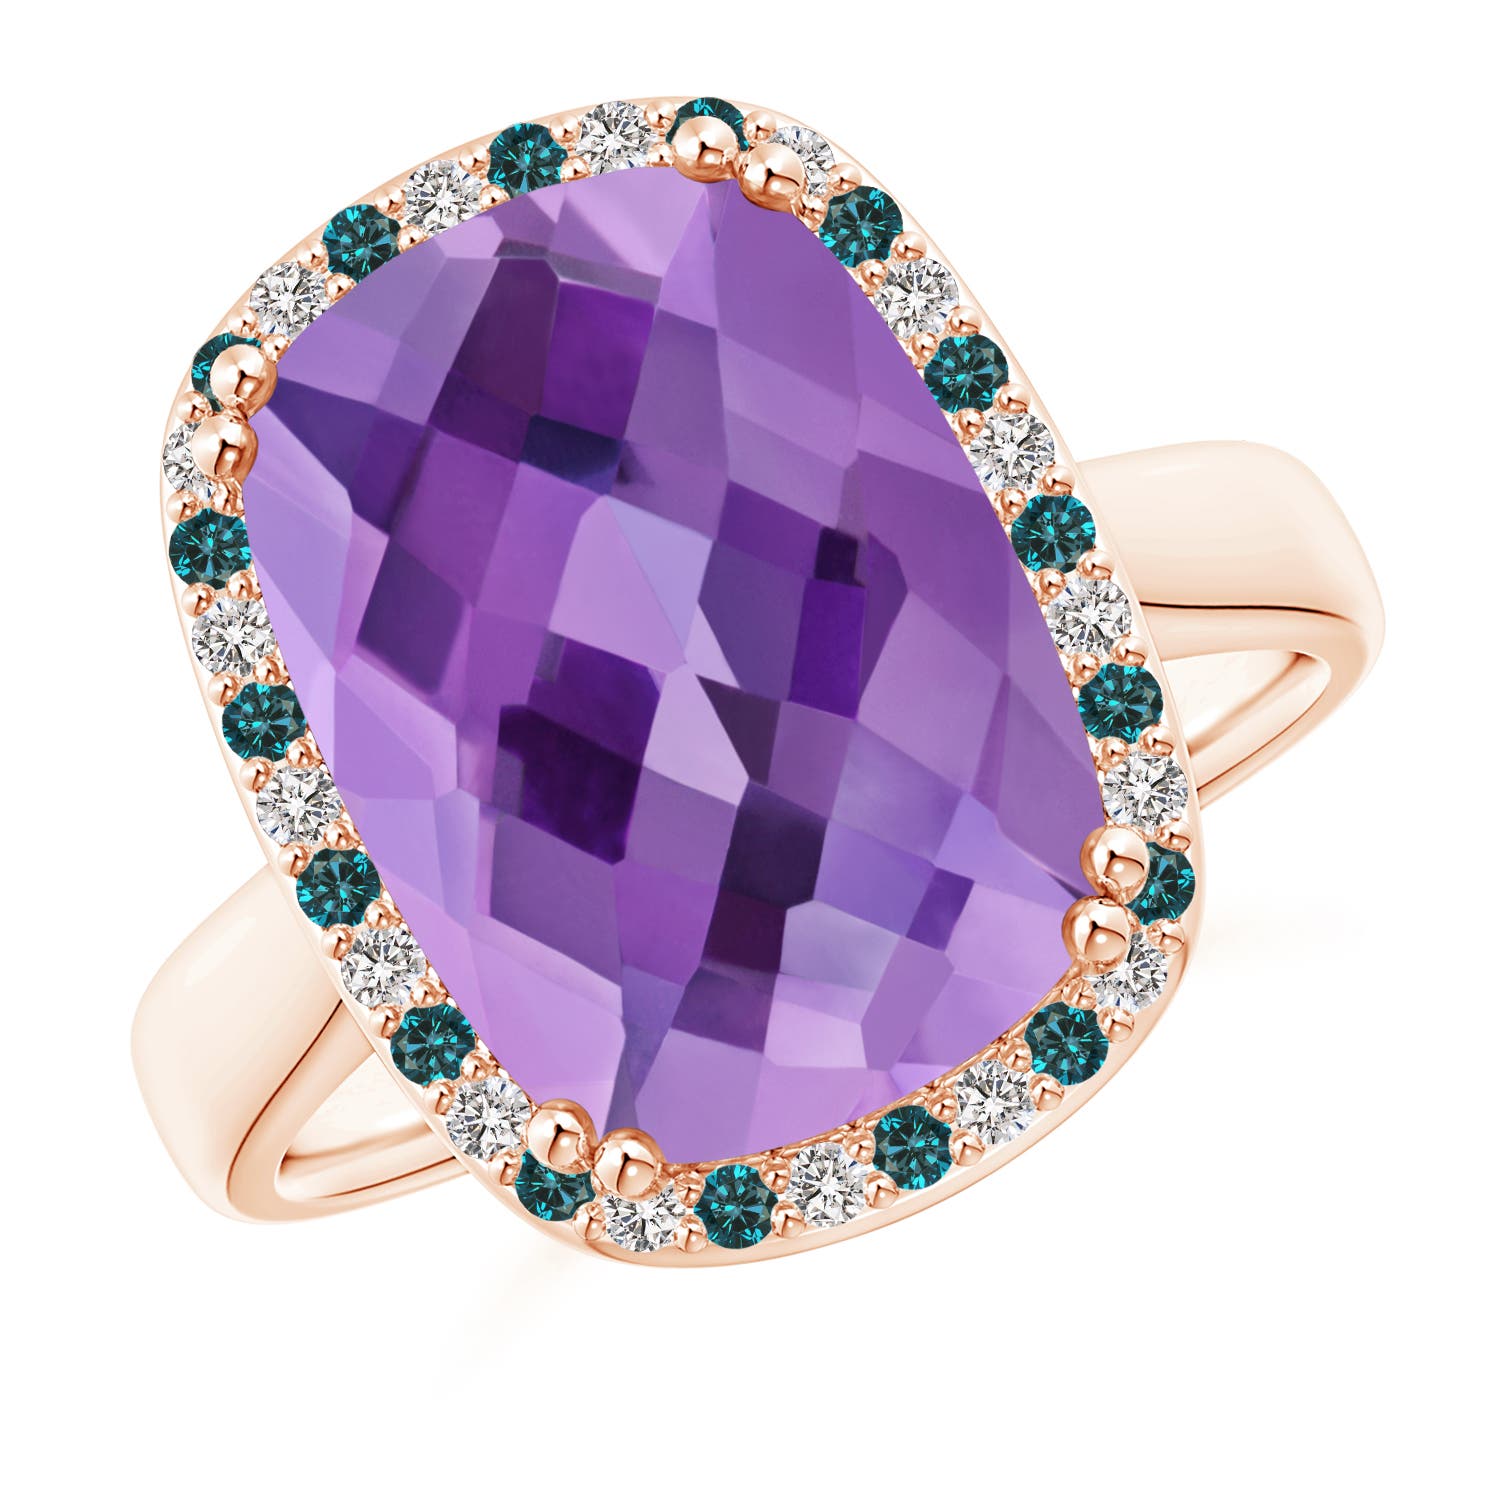 AA - Amethyst / 6.27 CT / 14 KT Rose Gold